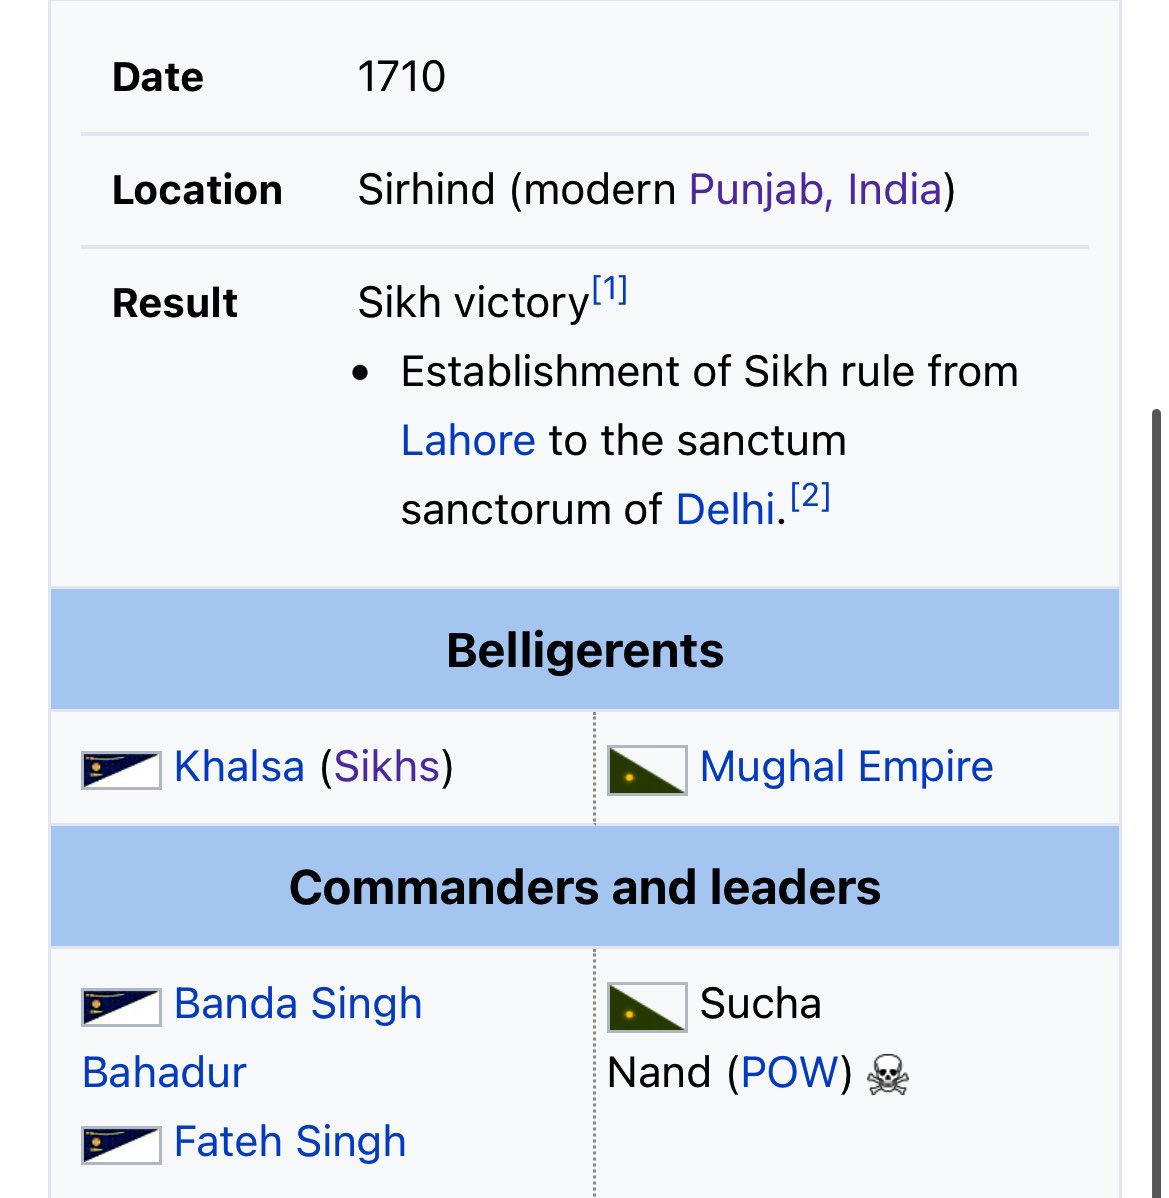 #SirhindFatehDiwas

The Siege of #Sirhind was fought between the #MughalEmpire and #Sikh forces in 1710.
The #Sikhs besieged, stormed, captured, plundered and razed the city of Sirhind after defeating and beheading
#WazirKhan in the Battle of Chappar Chiri.